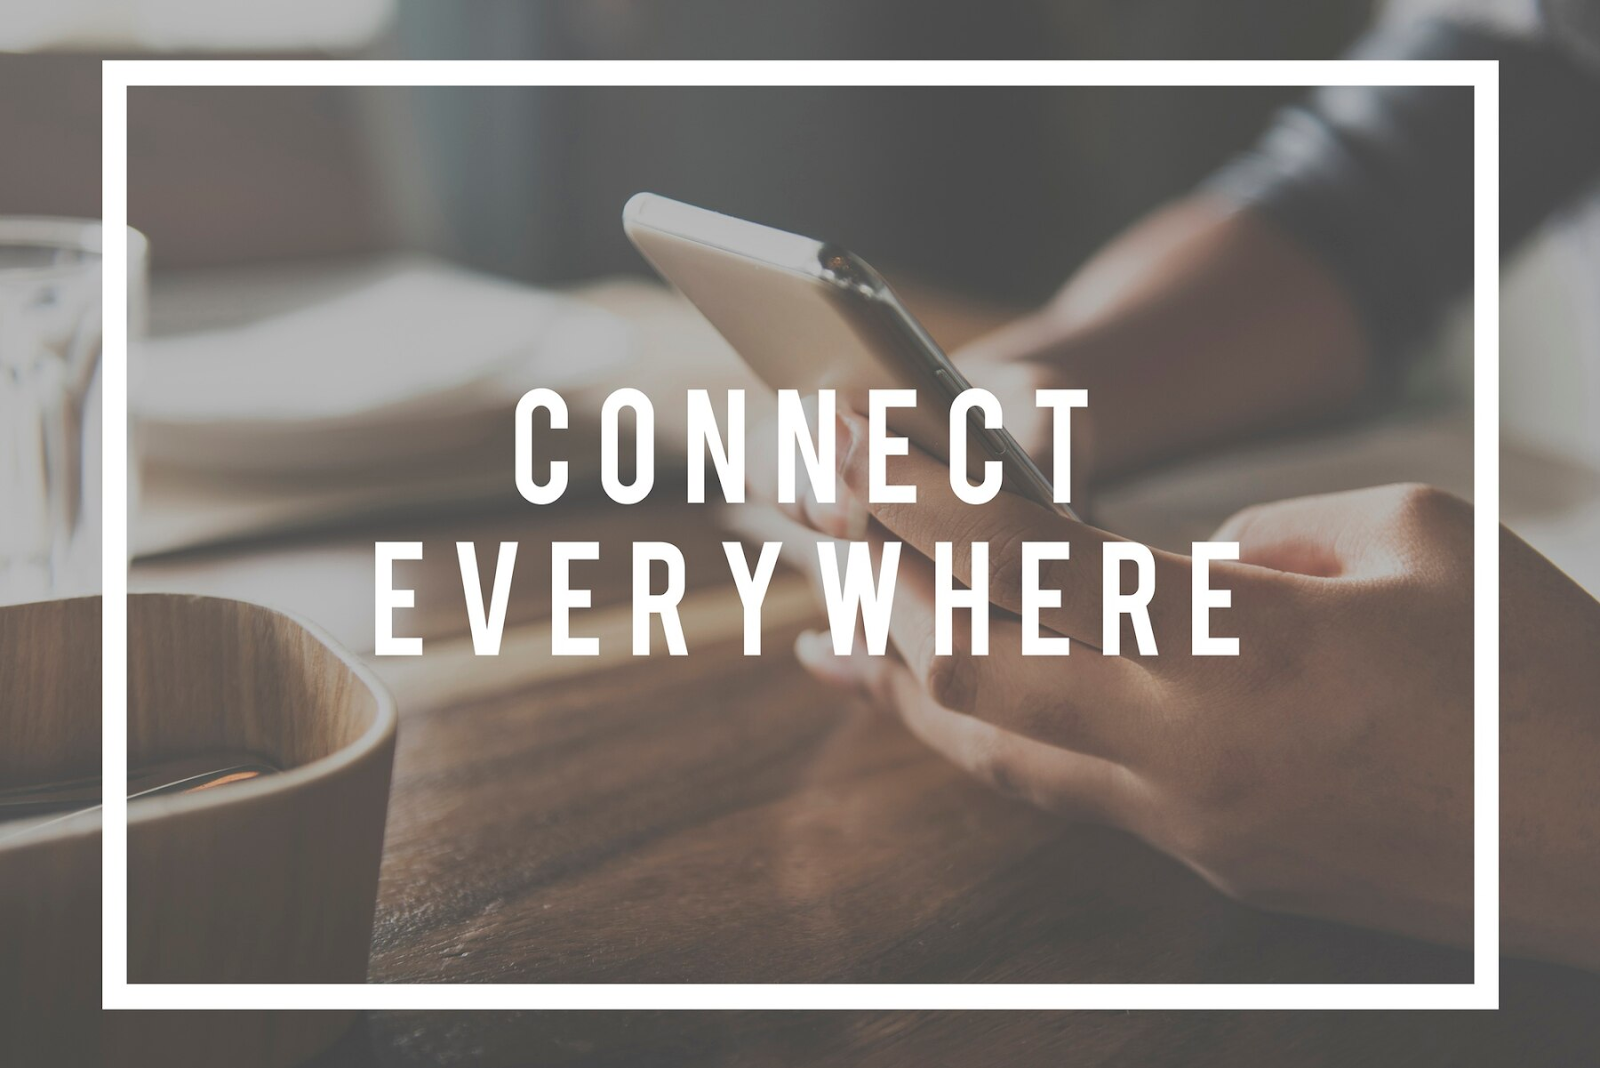 The words "connect everywhere" with the image of a phone in the background.